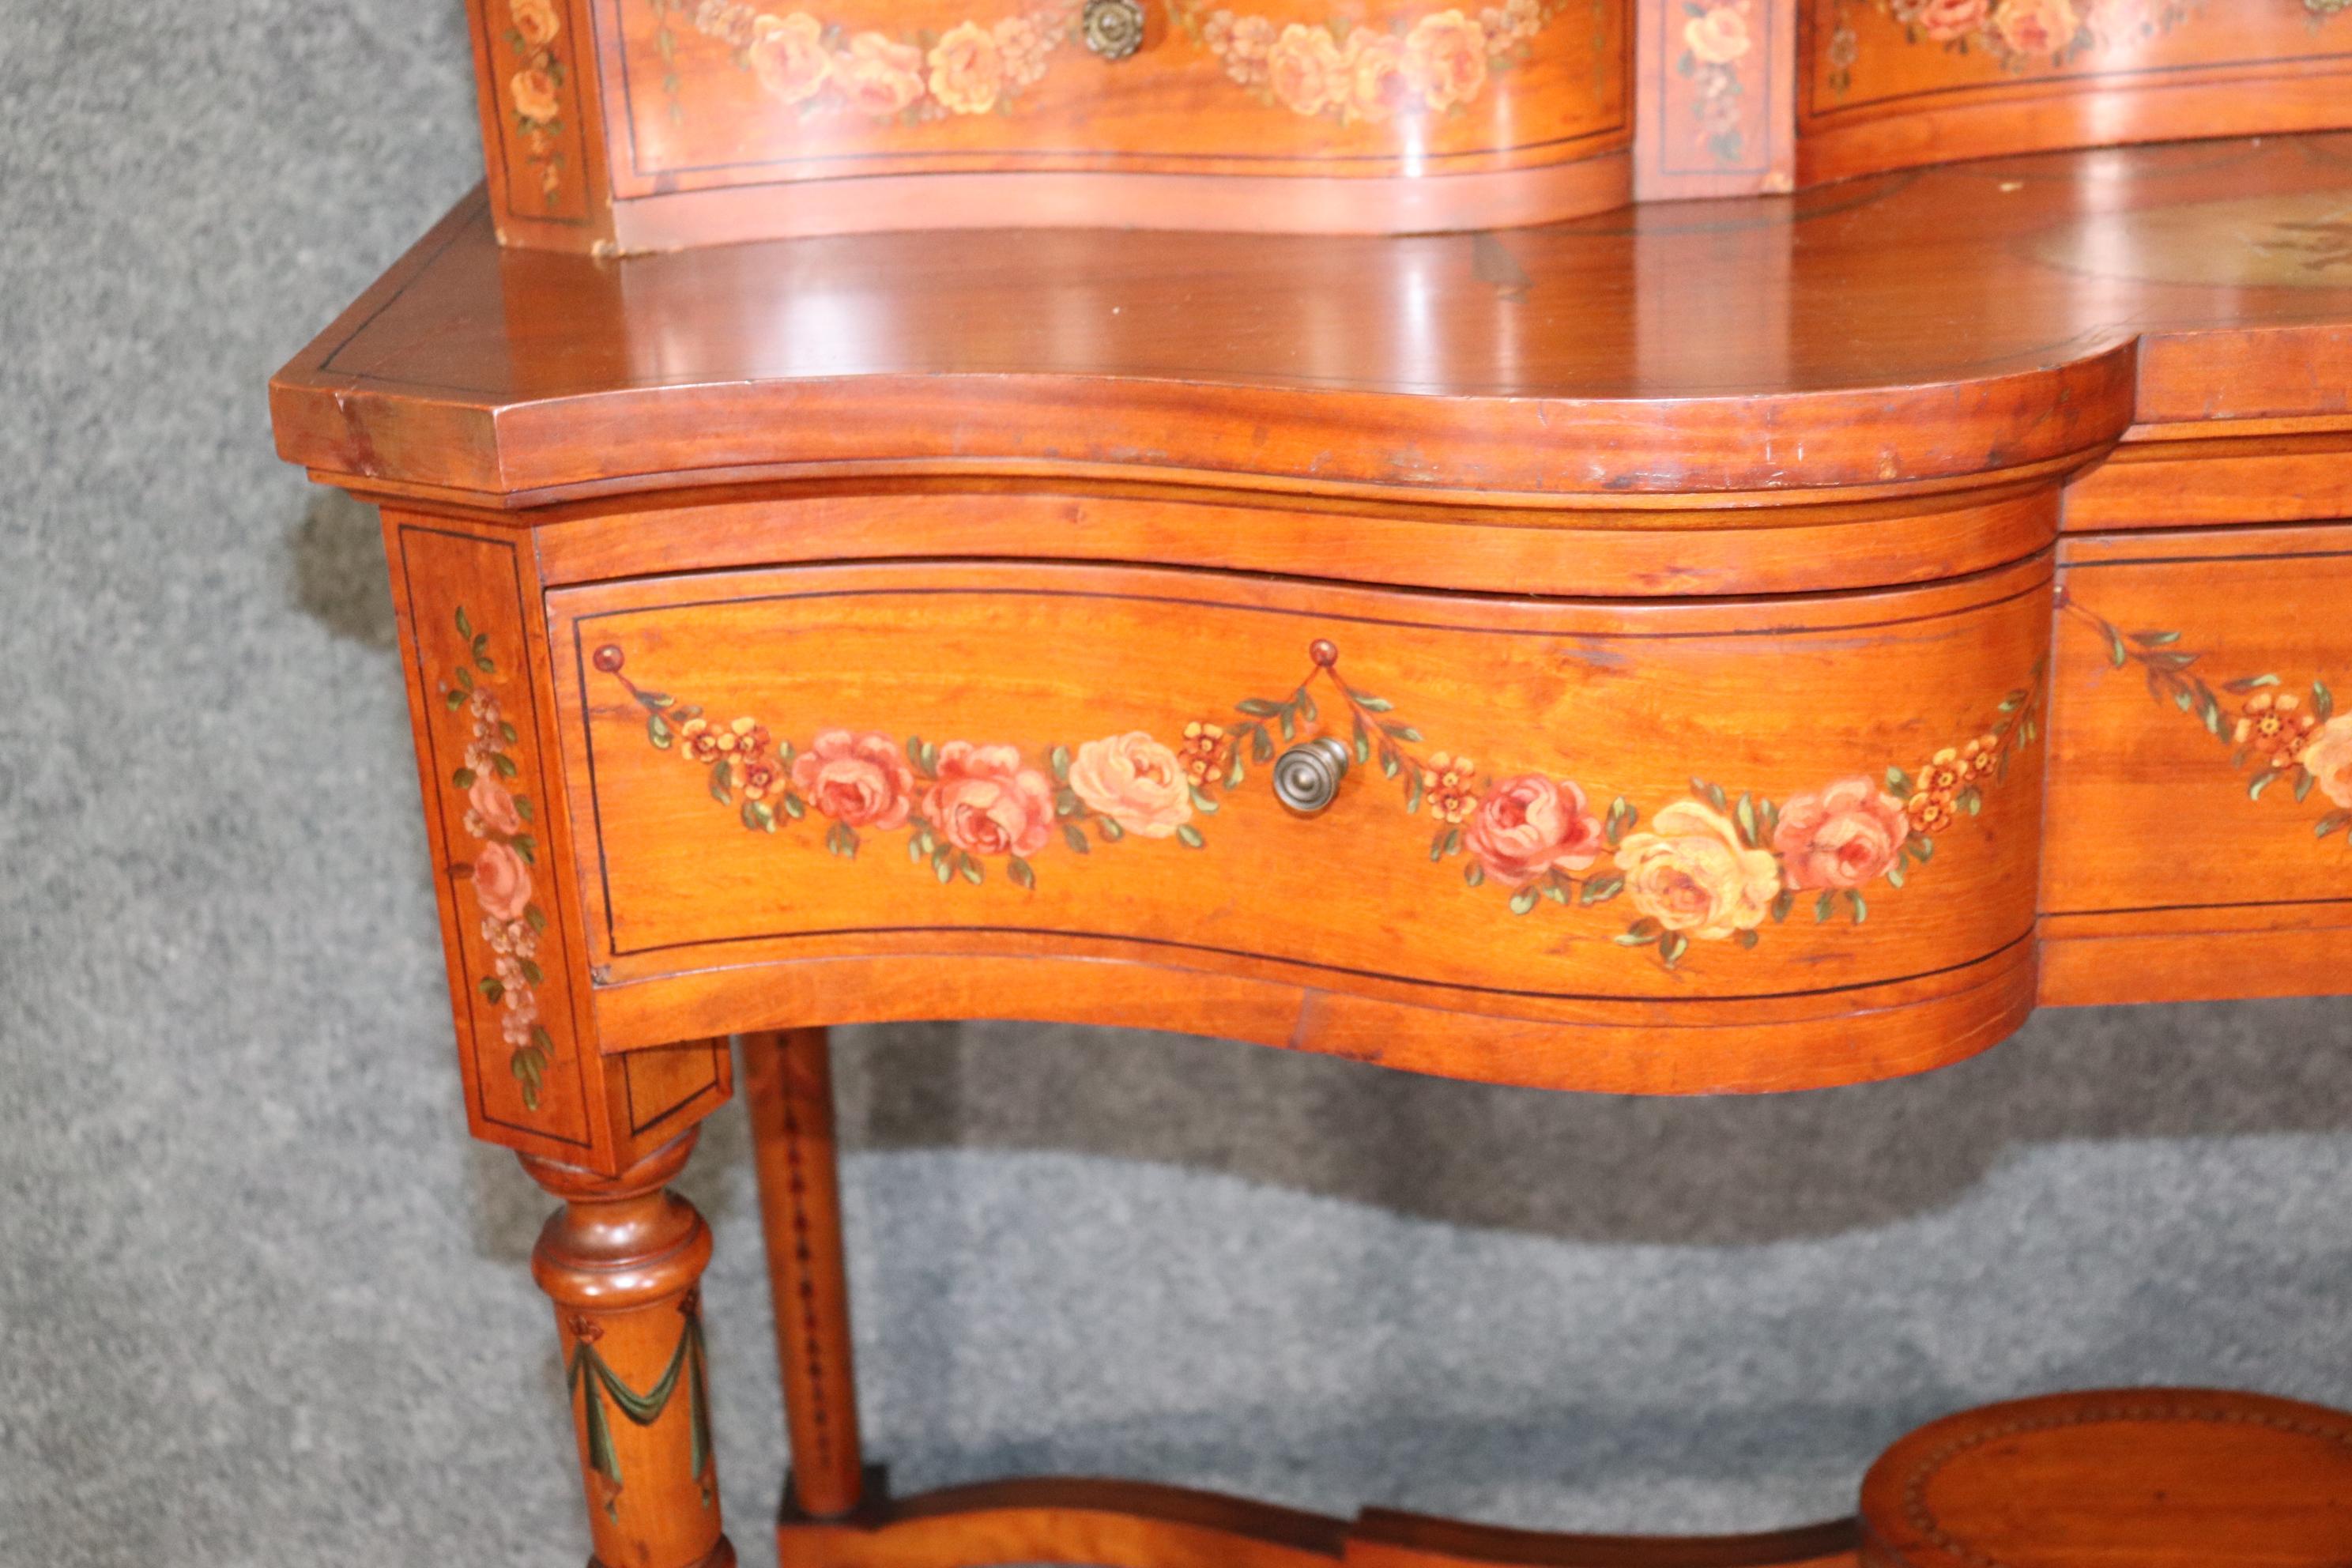 Fine Quality Gillow & Co Satinwood Paint Decorated Ladies Vanity Circa 1890s For Sale 11